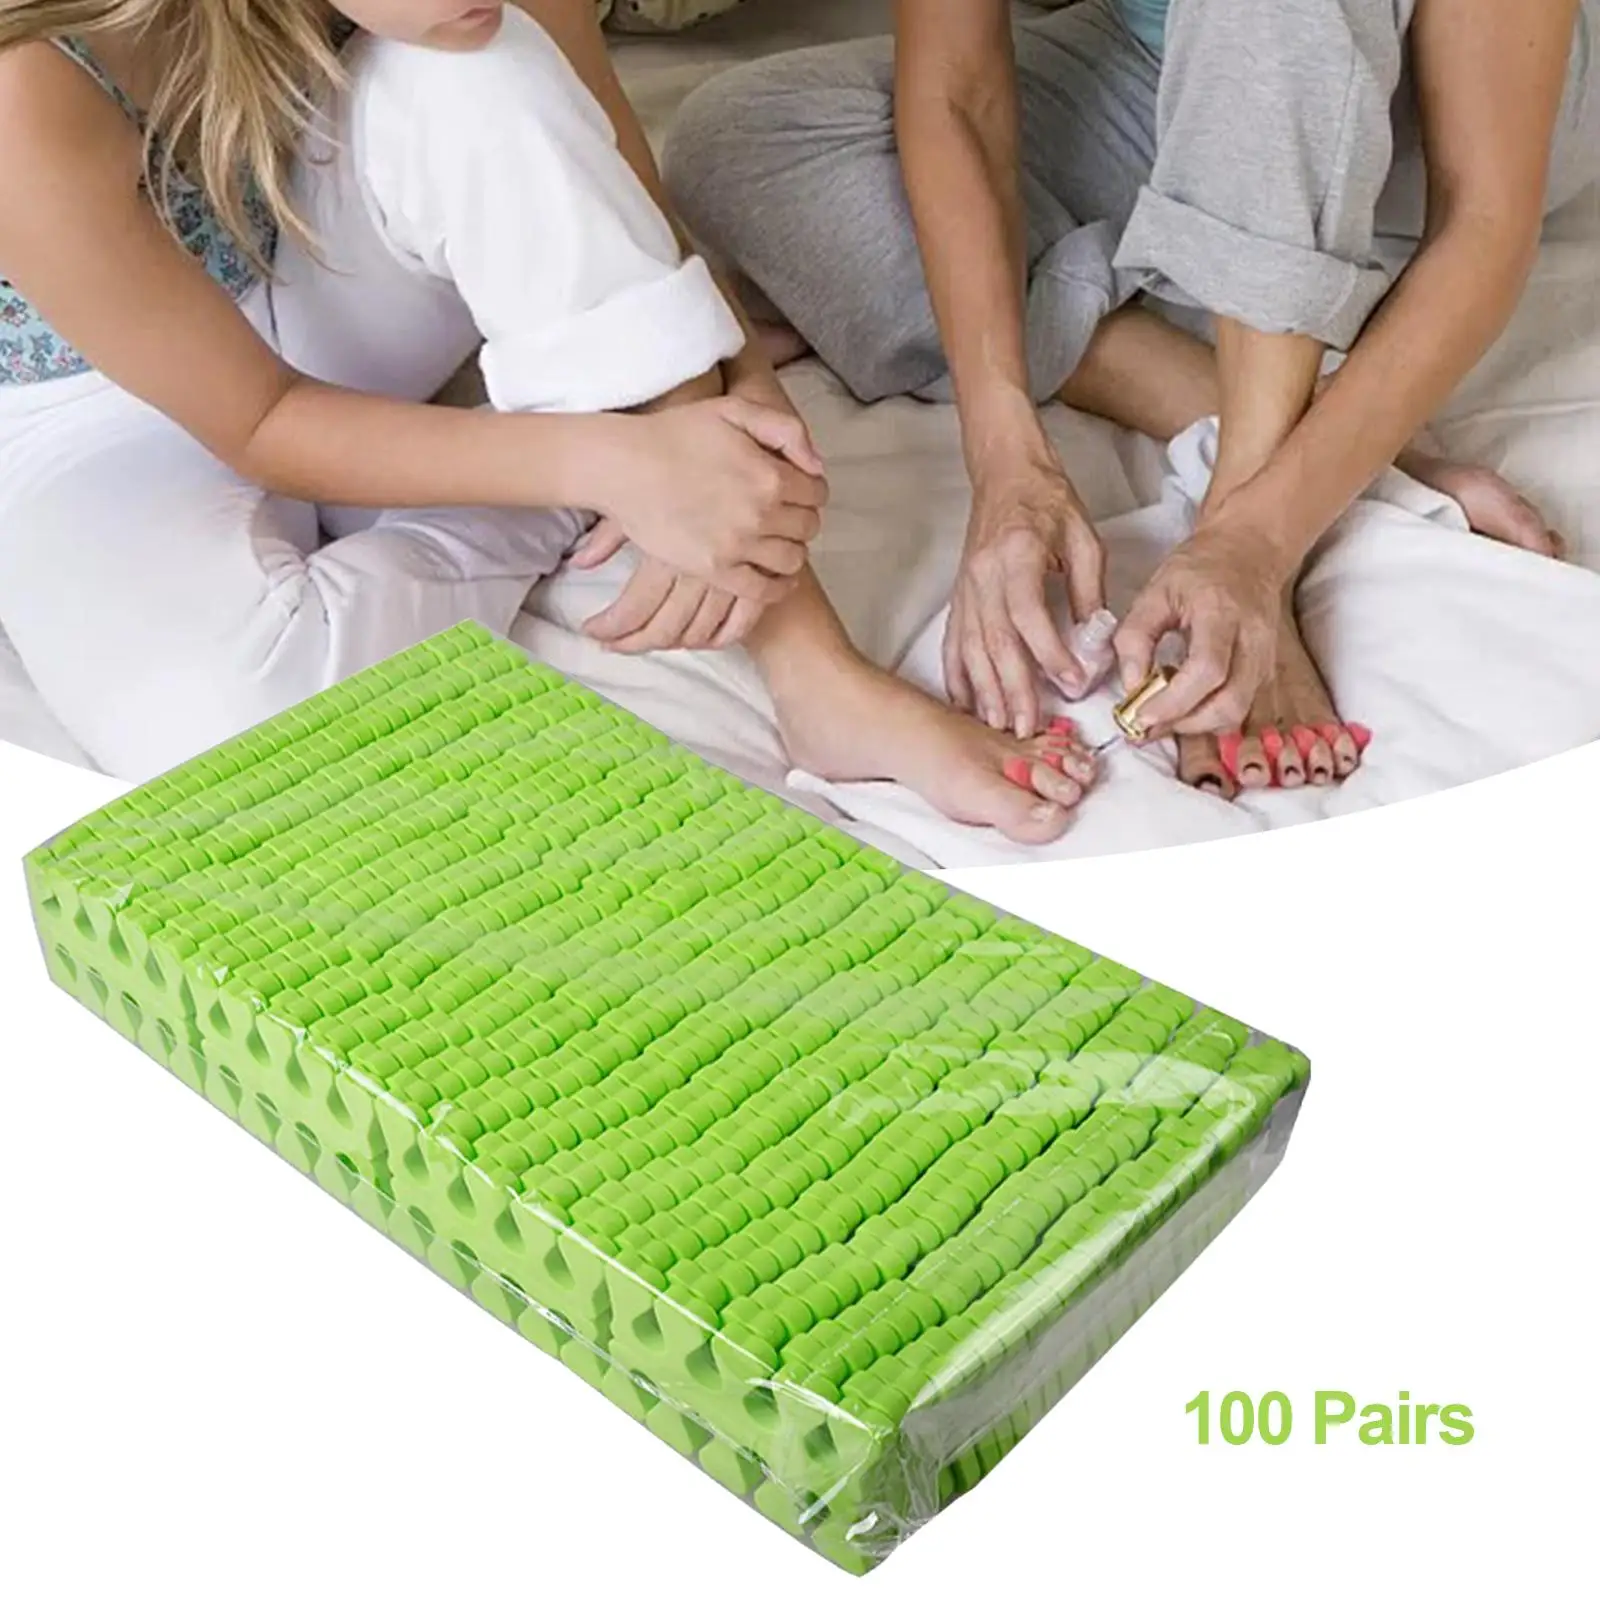 Nail Art Toe Separator Sponge Splitting Device Green Fingers Separators for Manicure Home Use Old Teen Pedicures 100 Pairs